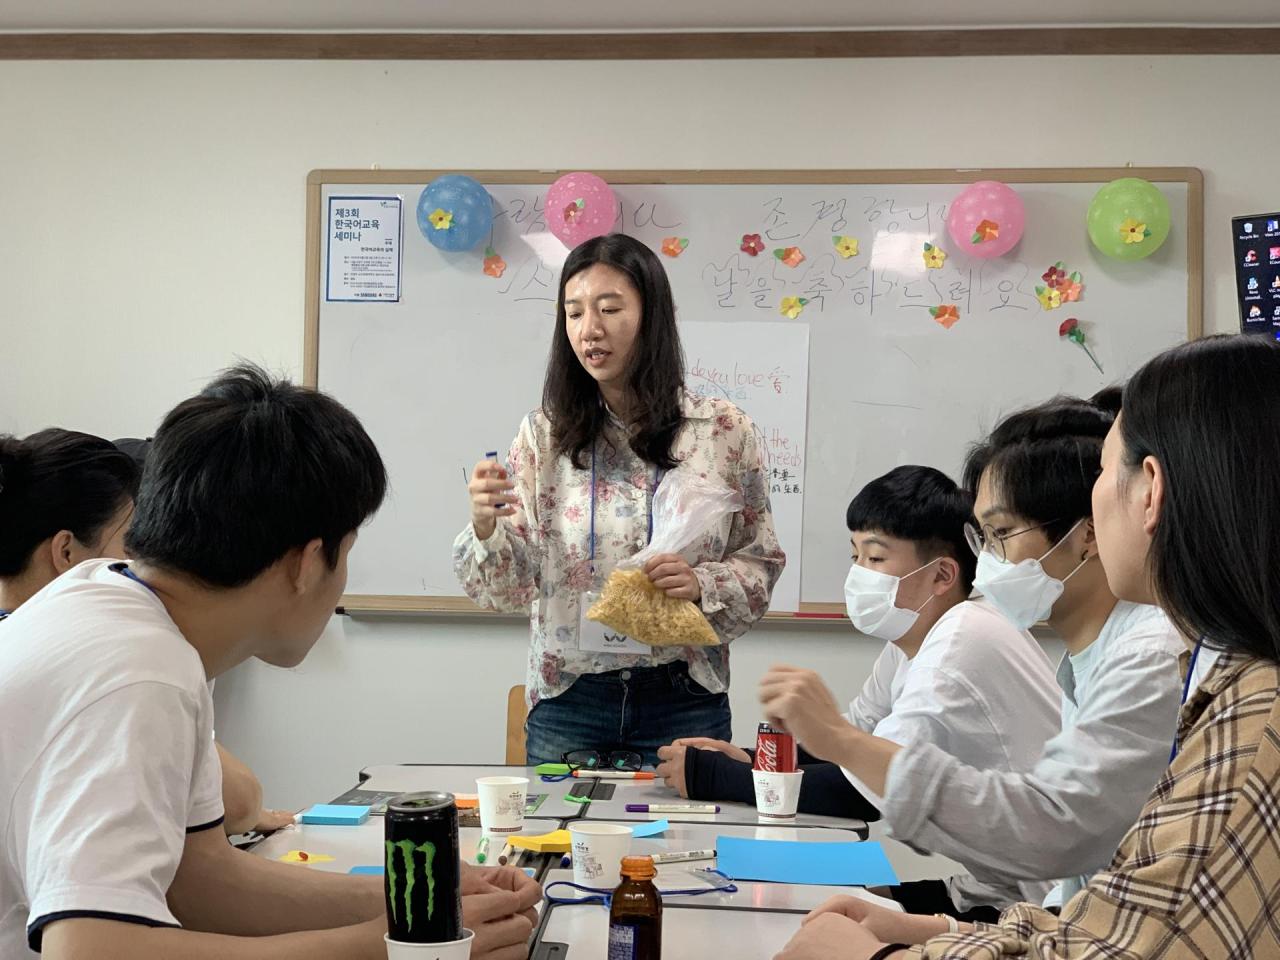 Wish School provides English classes tailored for Chinese-speaking students to help them discover their identities and their dreams. (Wish School)